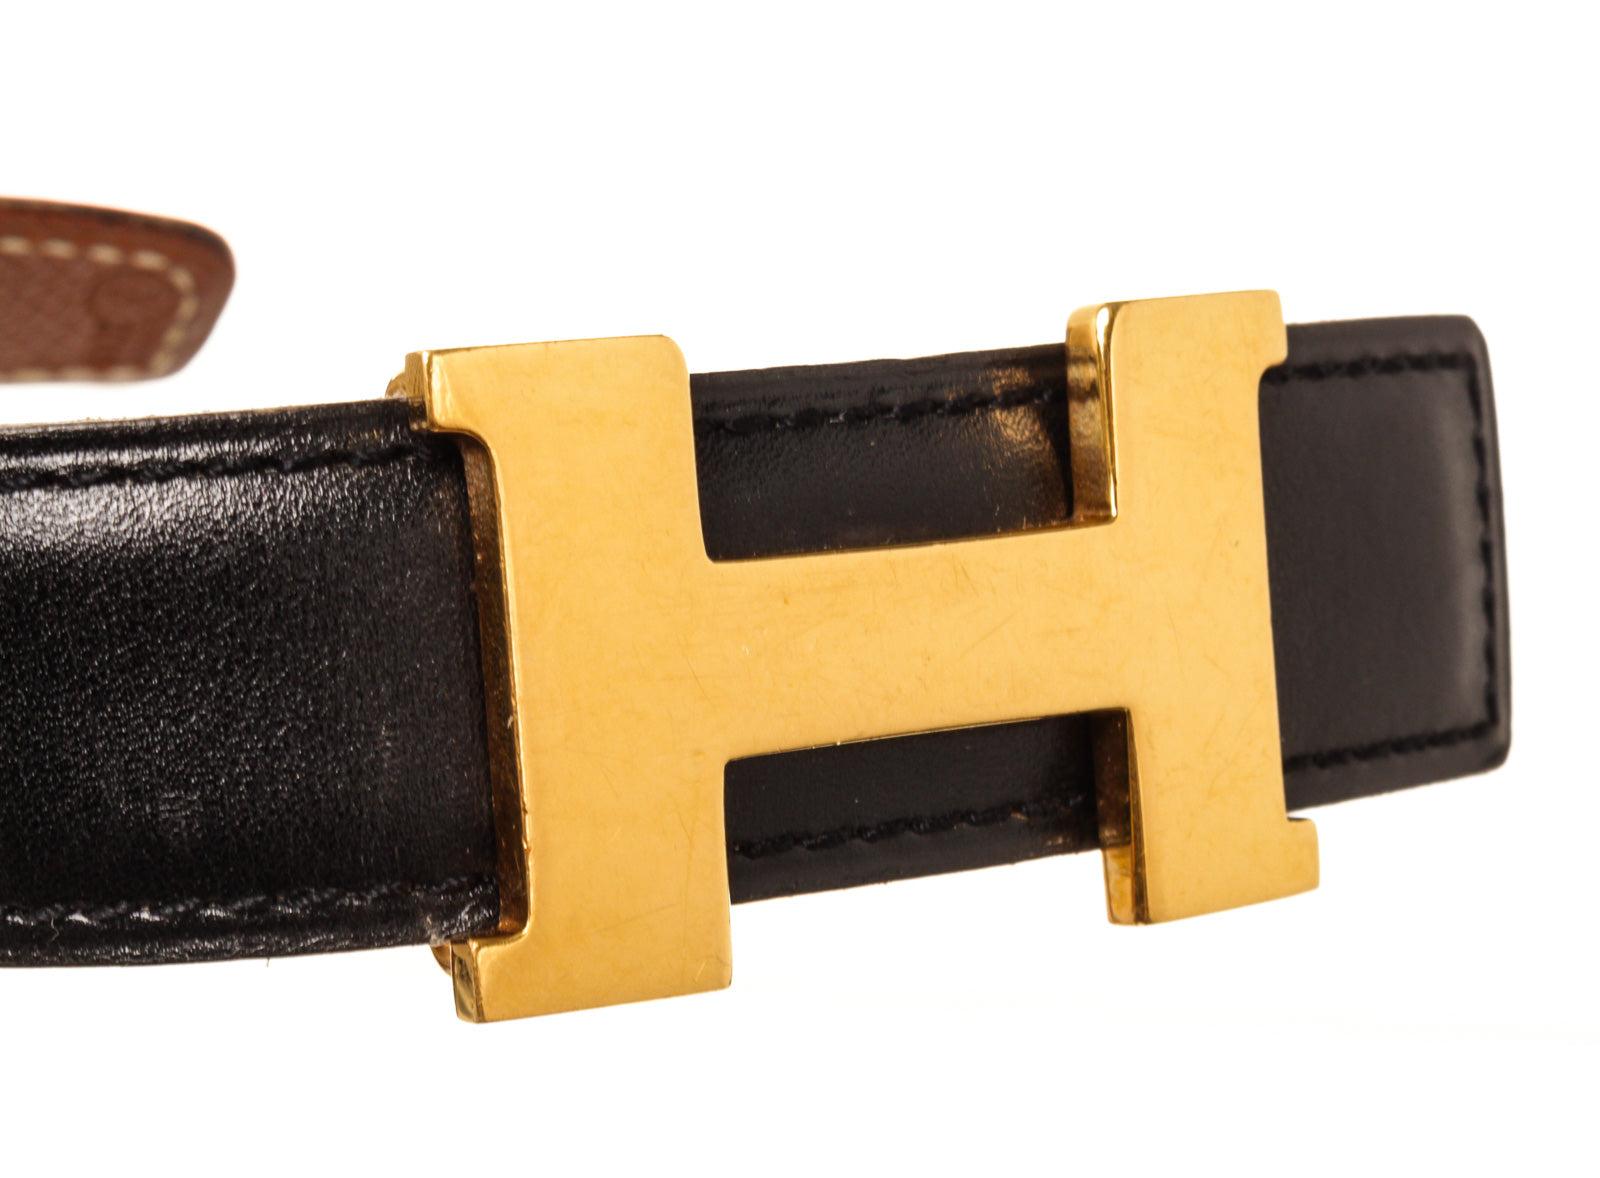 Black and brown leather Hermes reversible Mini Constance belt featuring gold-tone 